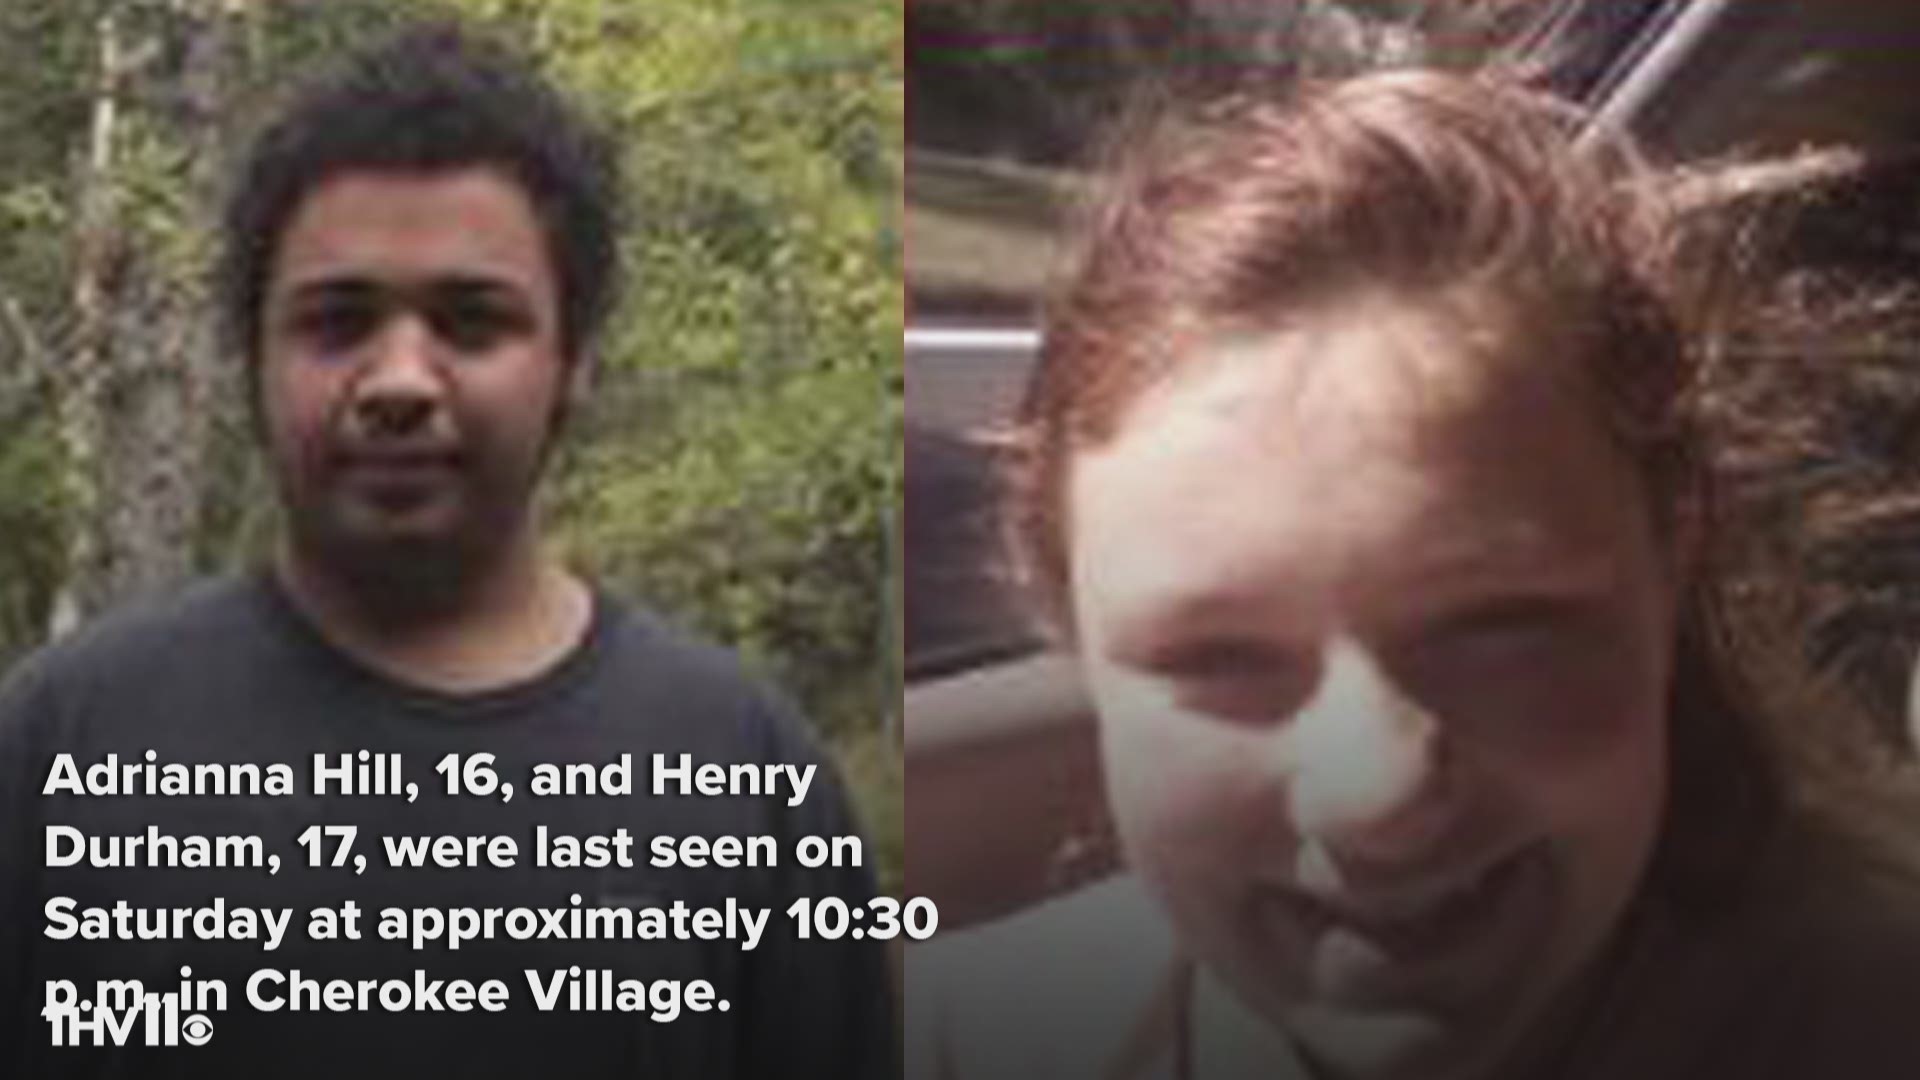 Adrianna Hill, 16, and Henry Durham, 17, were last seen on Saturday at approximate 10:30 p.m. in Cherokee Village.